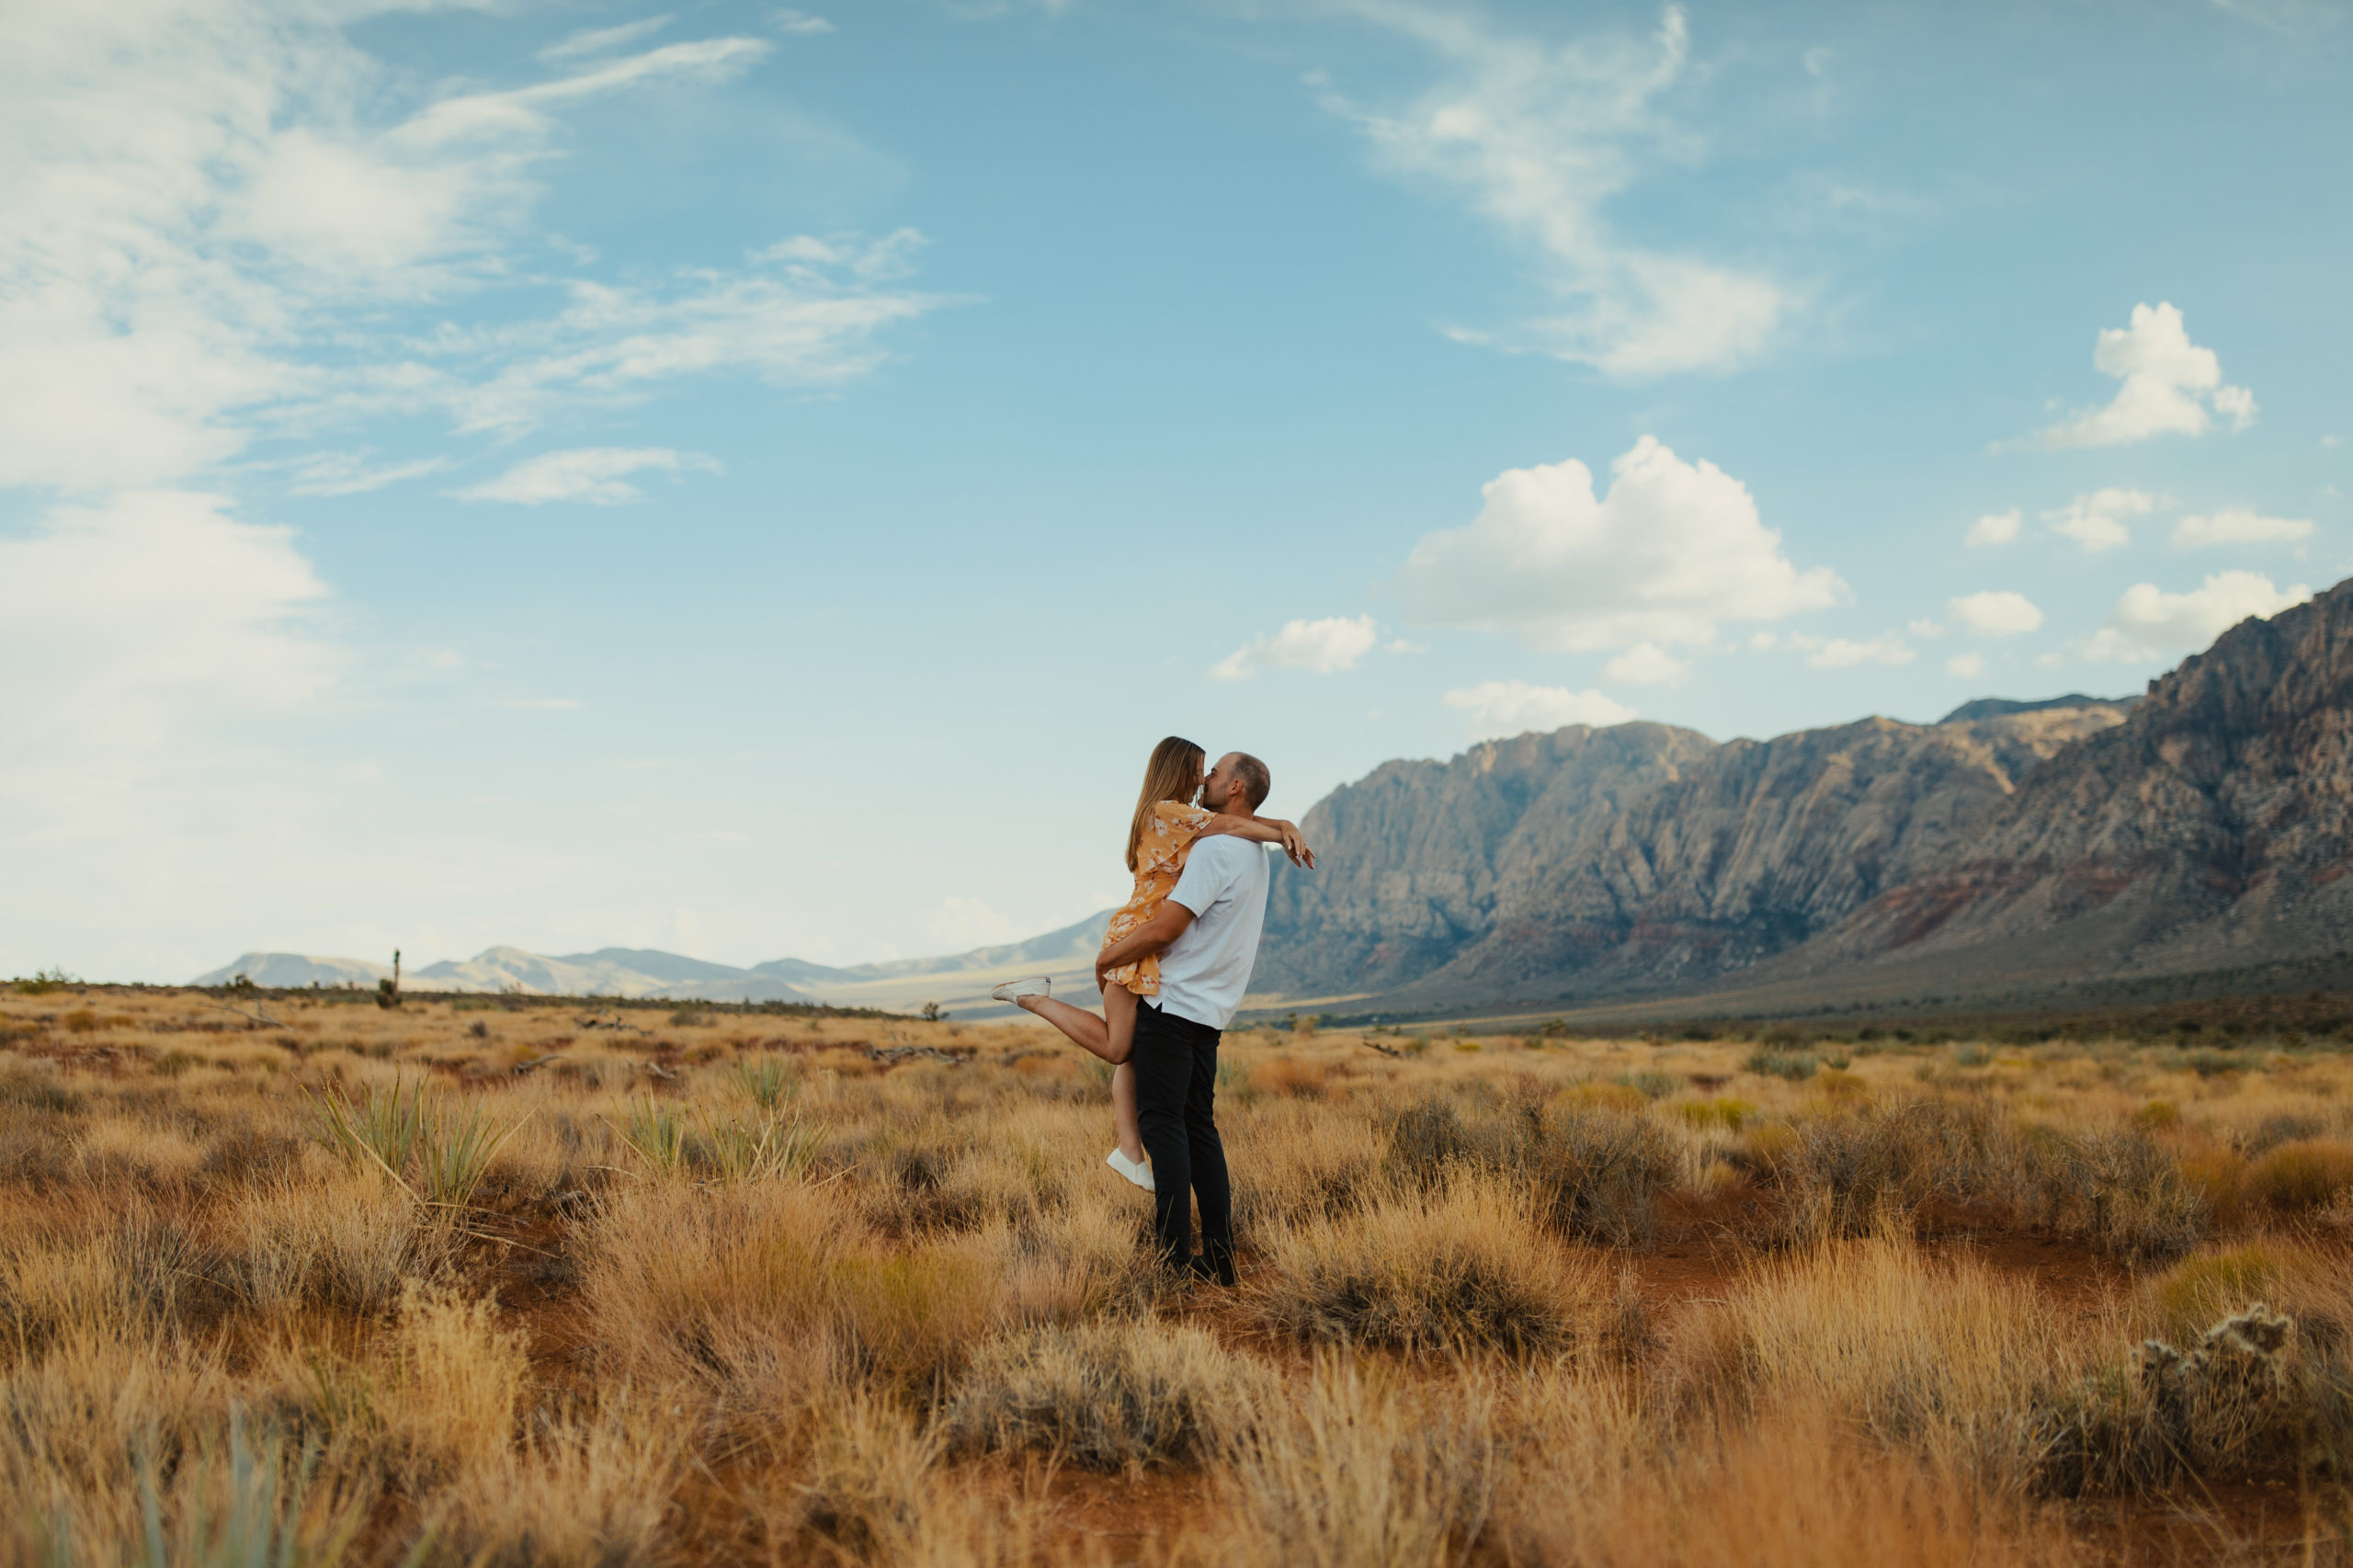 boyfriend picking girlfriend up in a field in the desert with mountains in the background during their engagement session